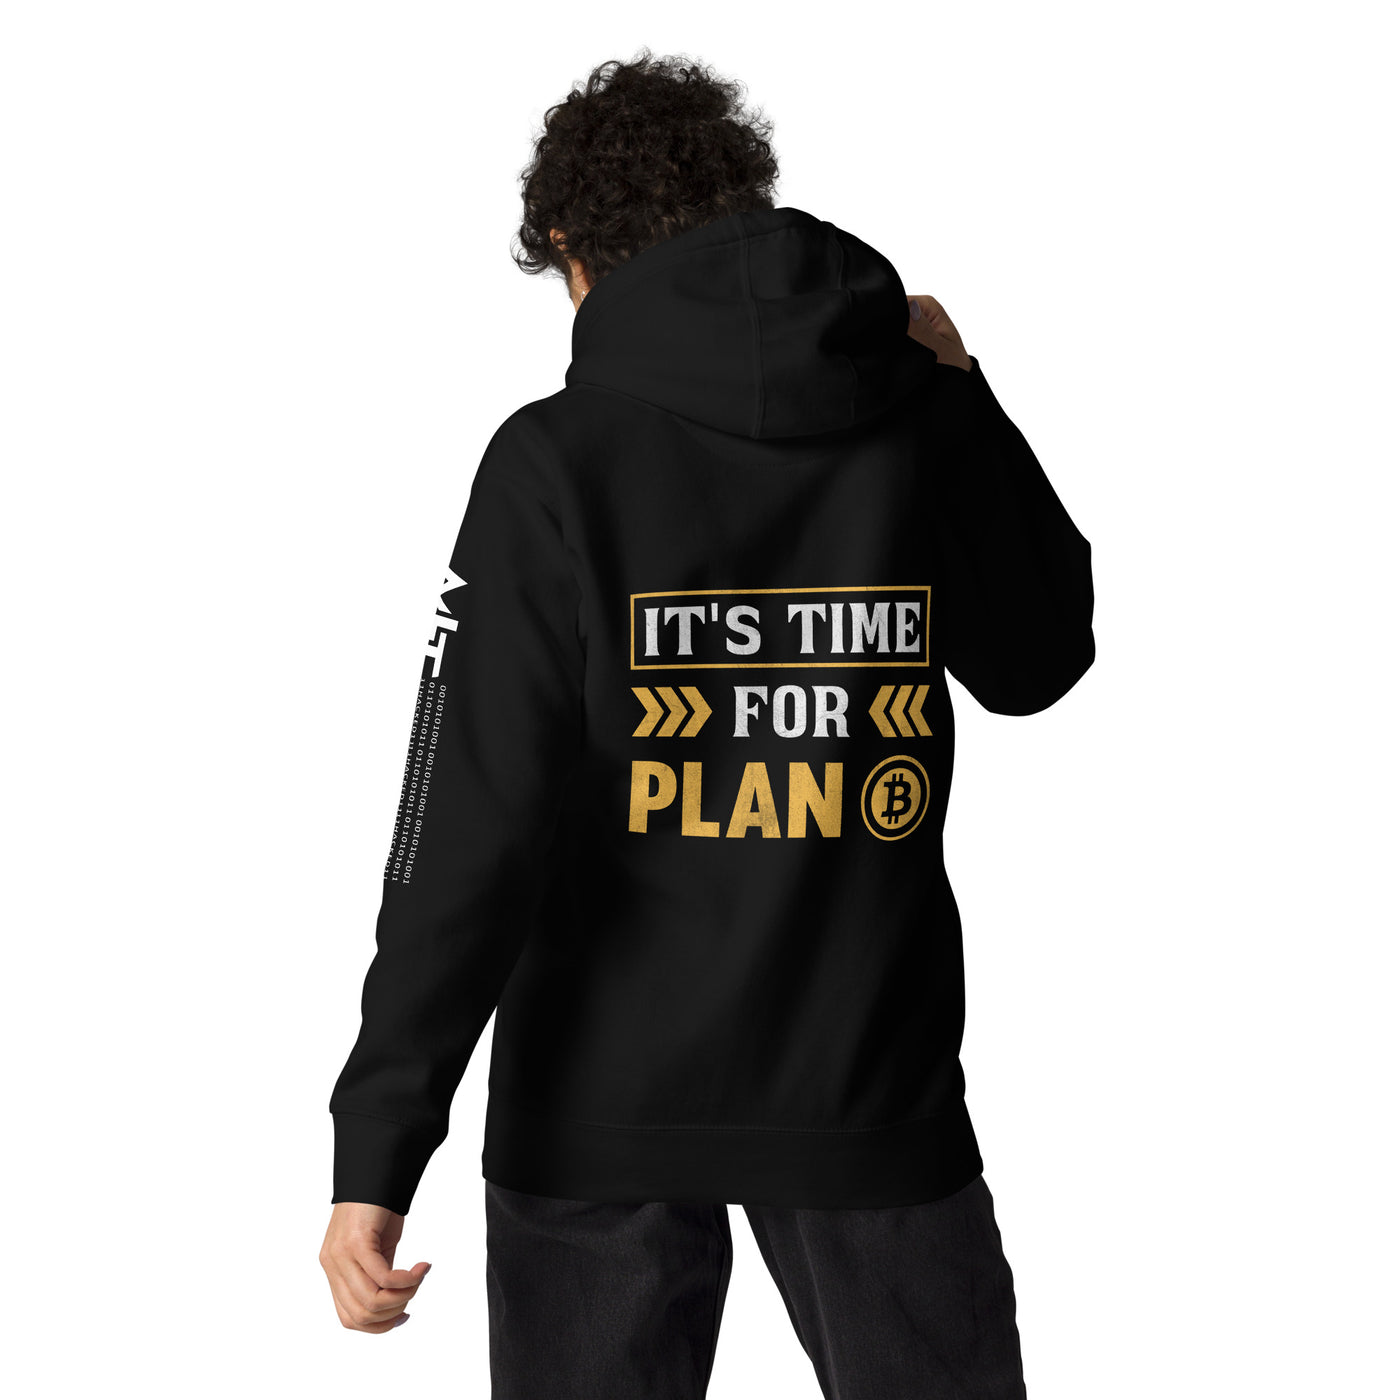 It's Time for Plan B - Unisex Hoodie ( Back Print )